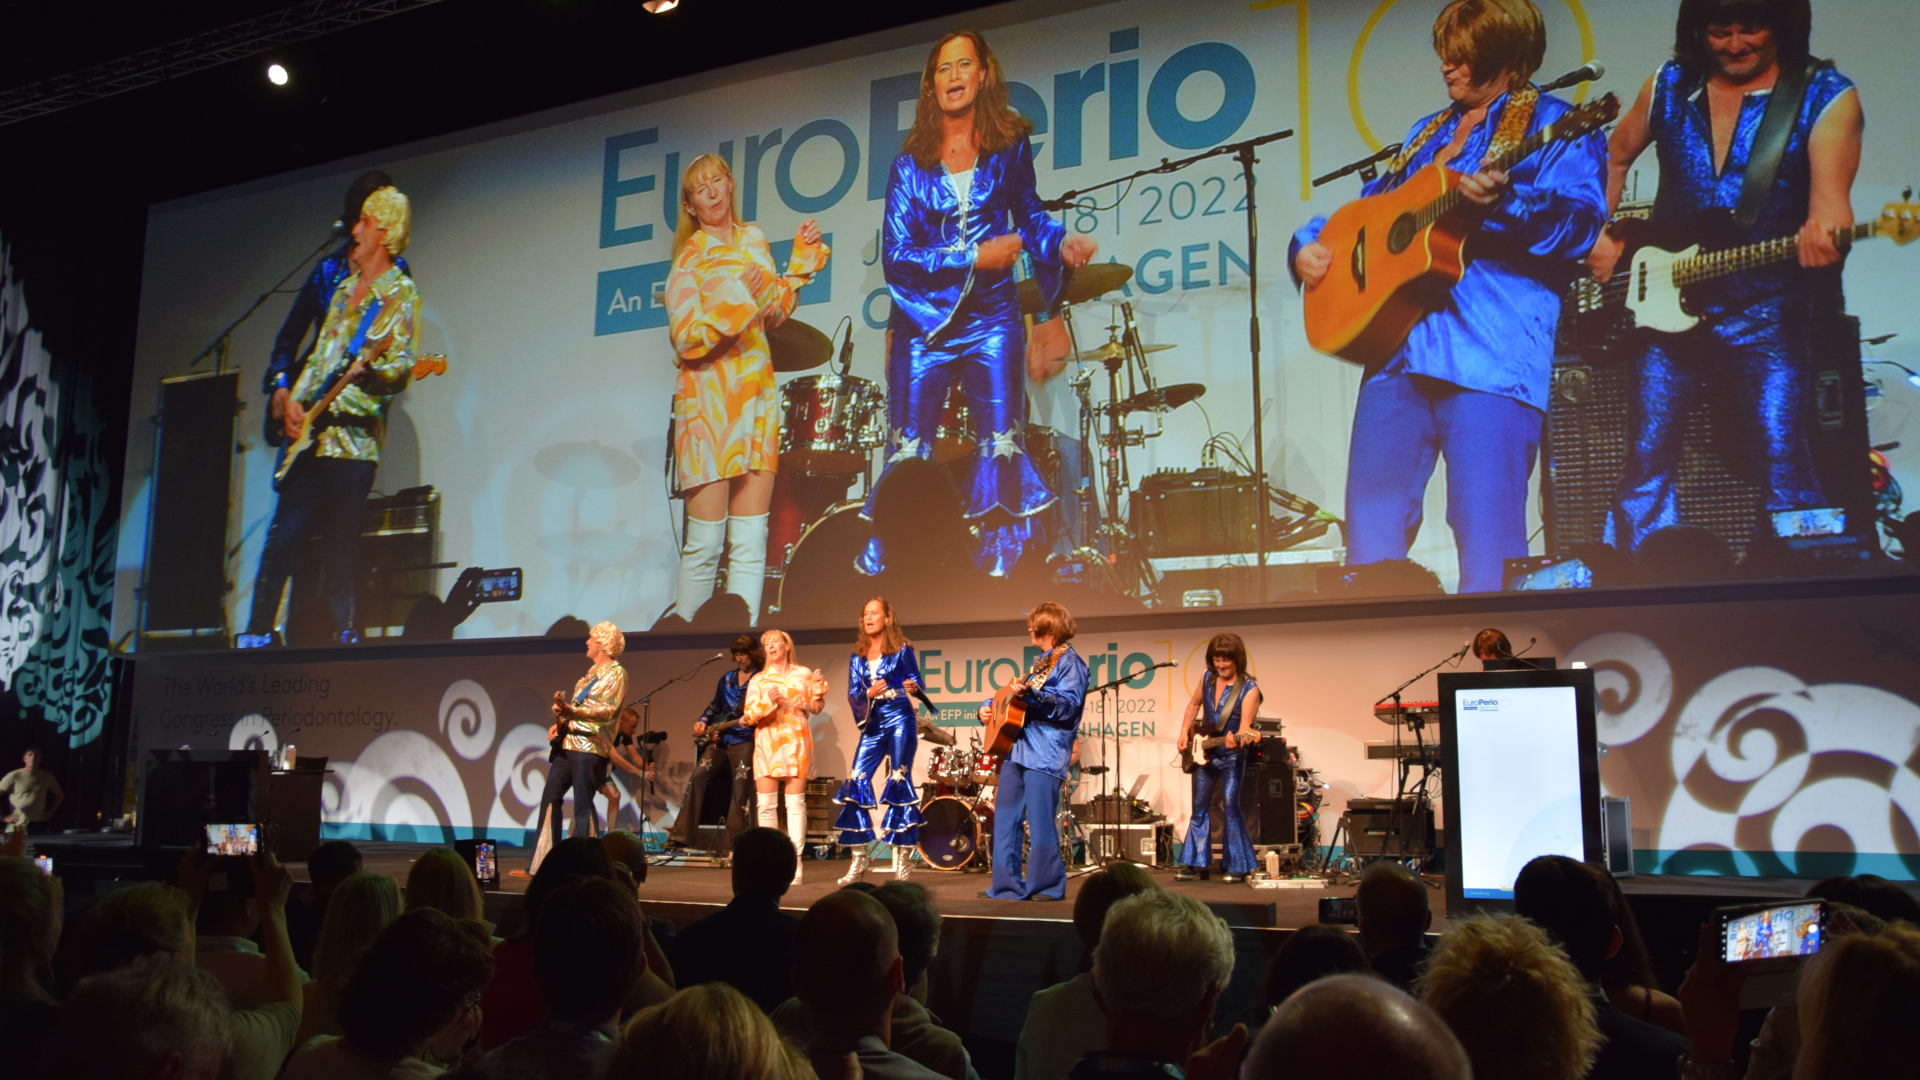 Members of the organising committee welcoming participants of EuroPerio10 in a rather unusual way—by cheerfully singing along to ABBA’s tunes. (Image: DTI)